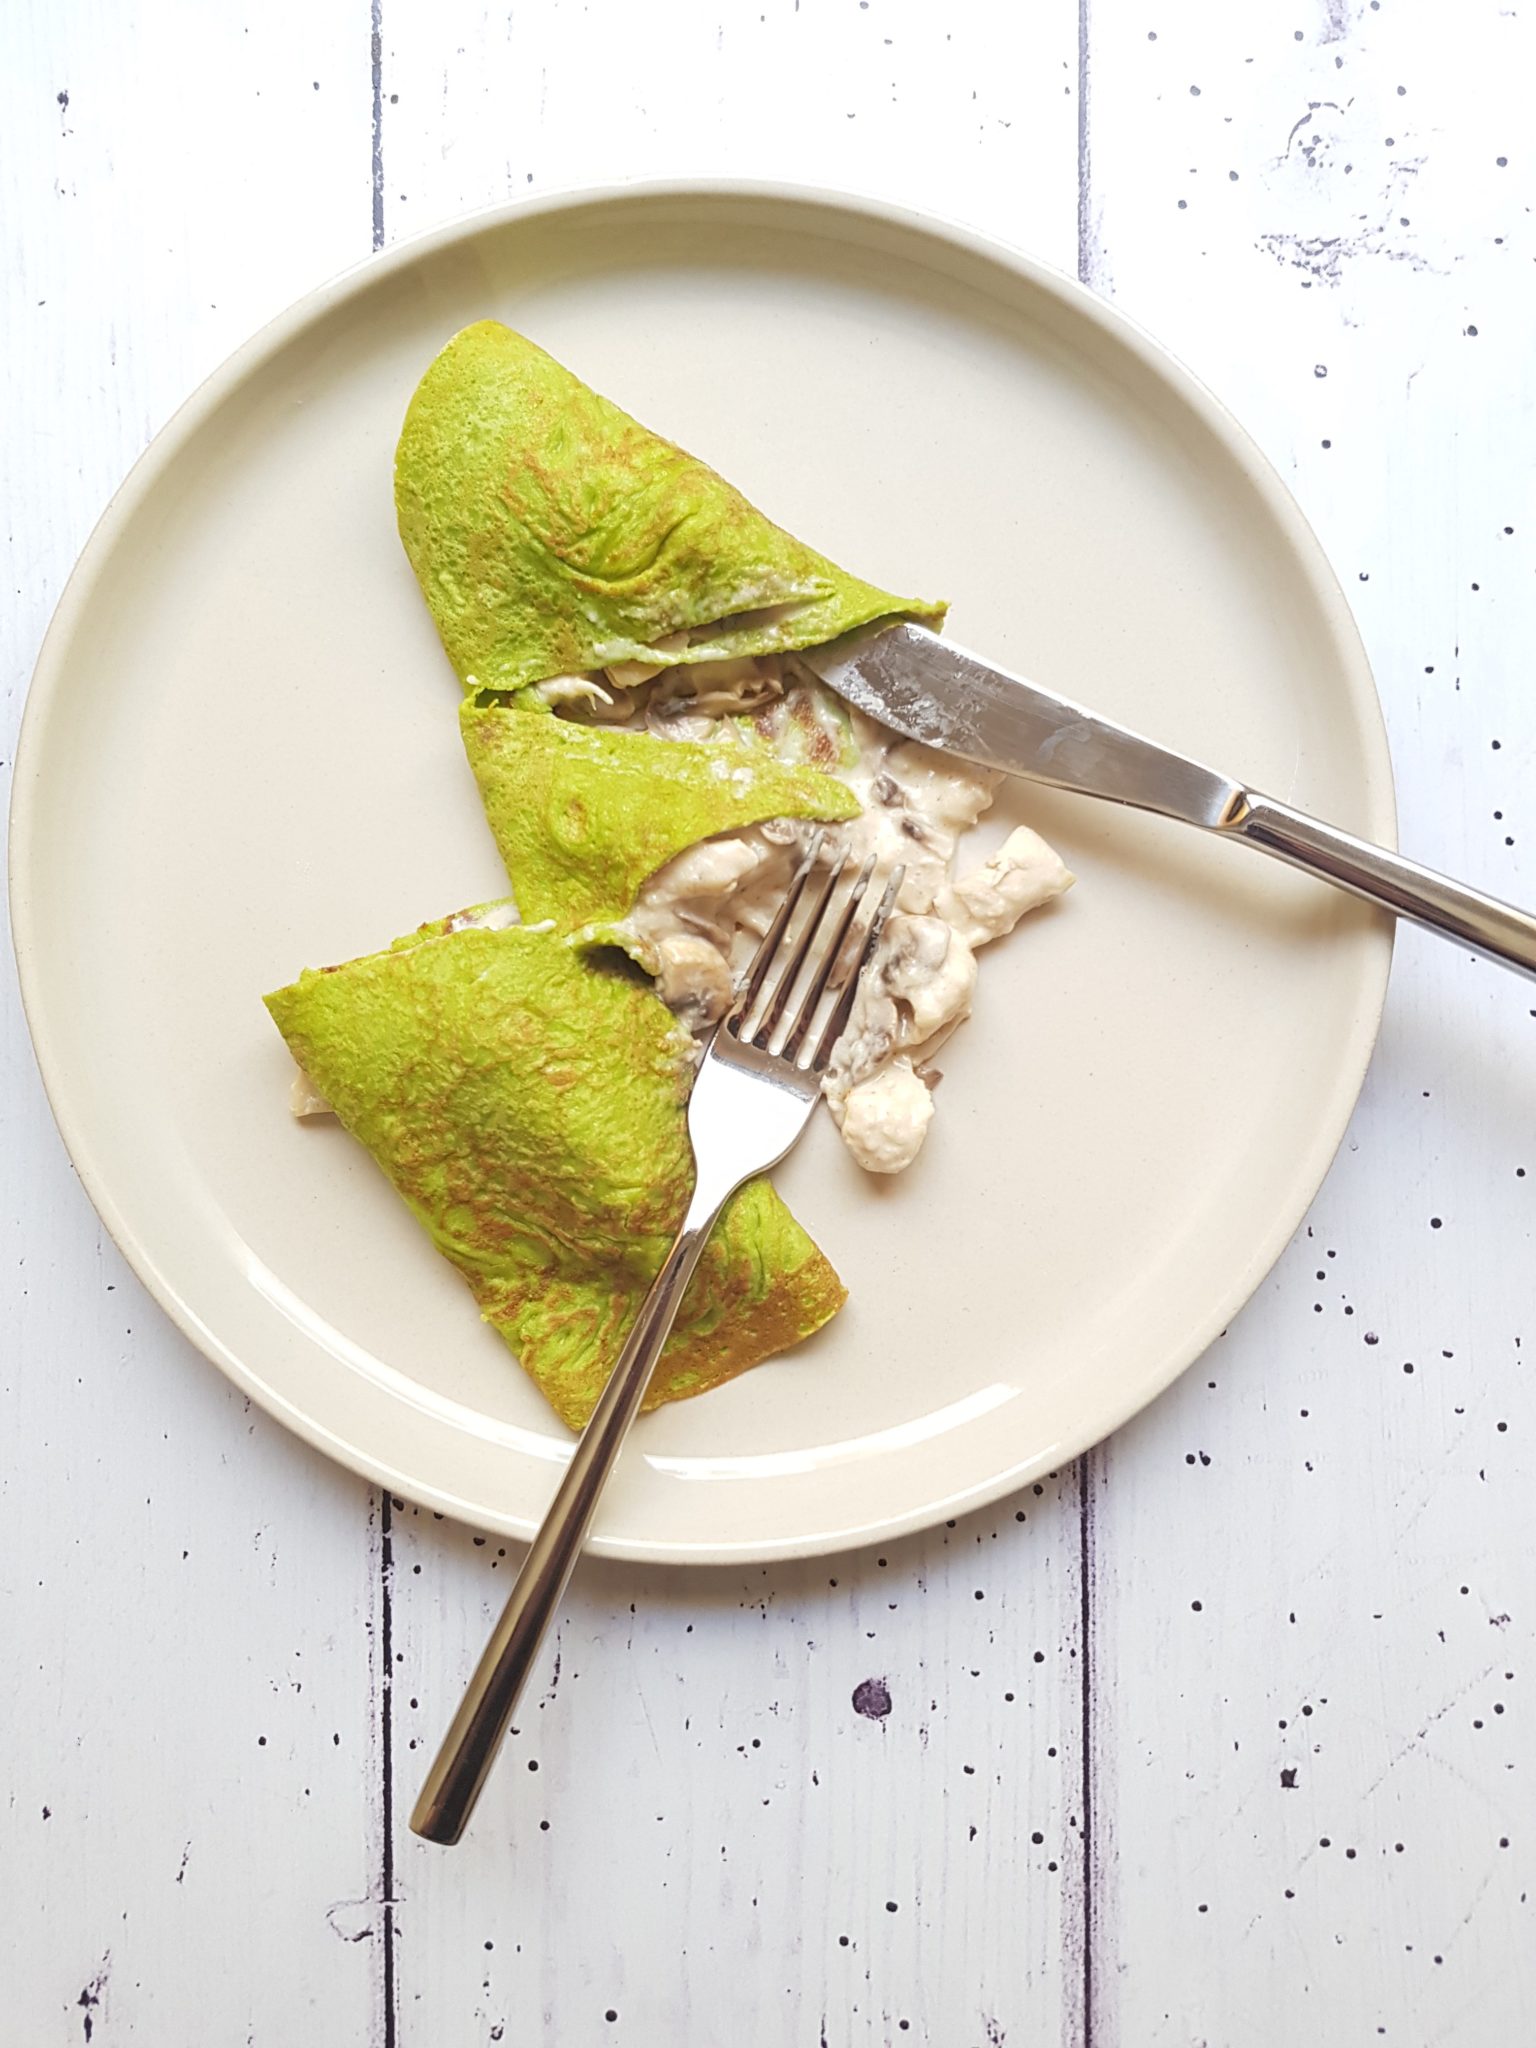 #recipe: Whip It! Chicken and mushroom cream spinach crepe | Live Healthy